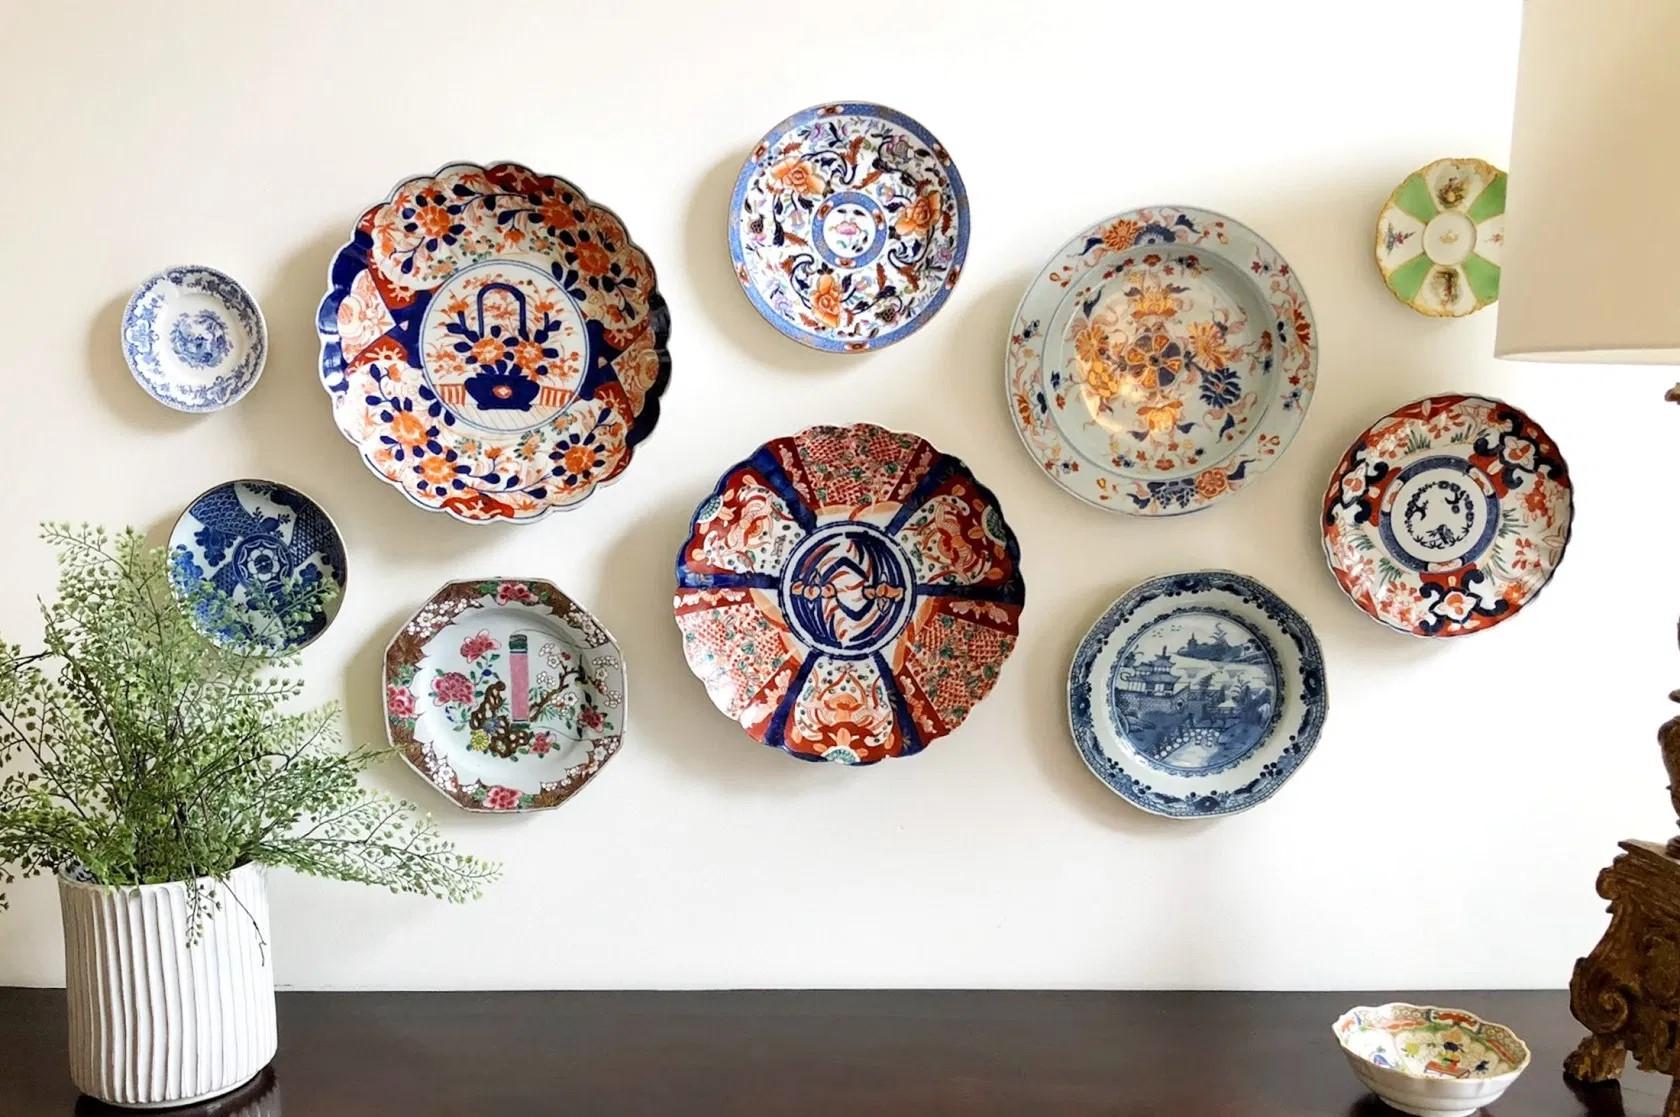 Perfect for interior wall decoration. We offer sets of 18-19th century Chinese/Japanese Imari plates in different sizes. Available in every quantity needed. The selection in the pictures might not be available due to stock changes, but we have